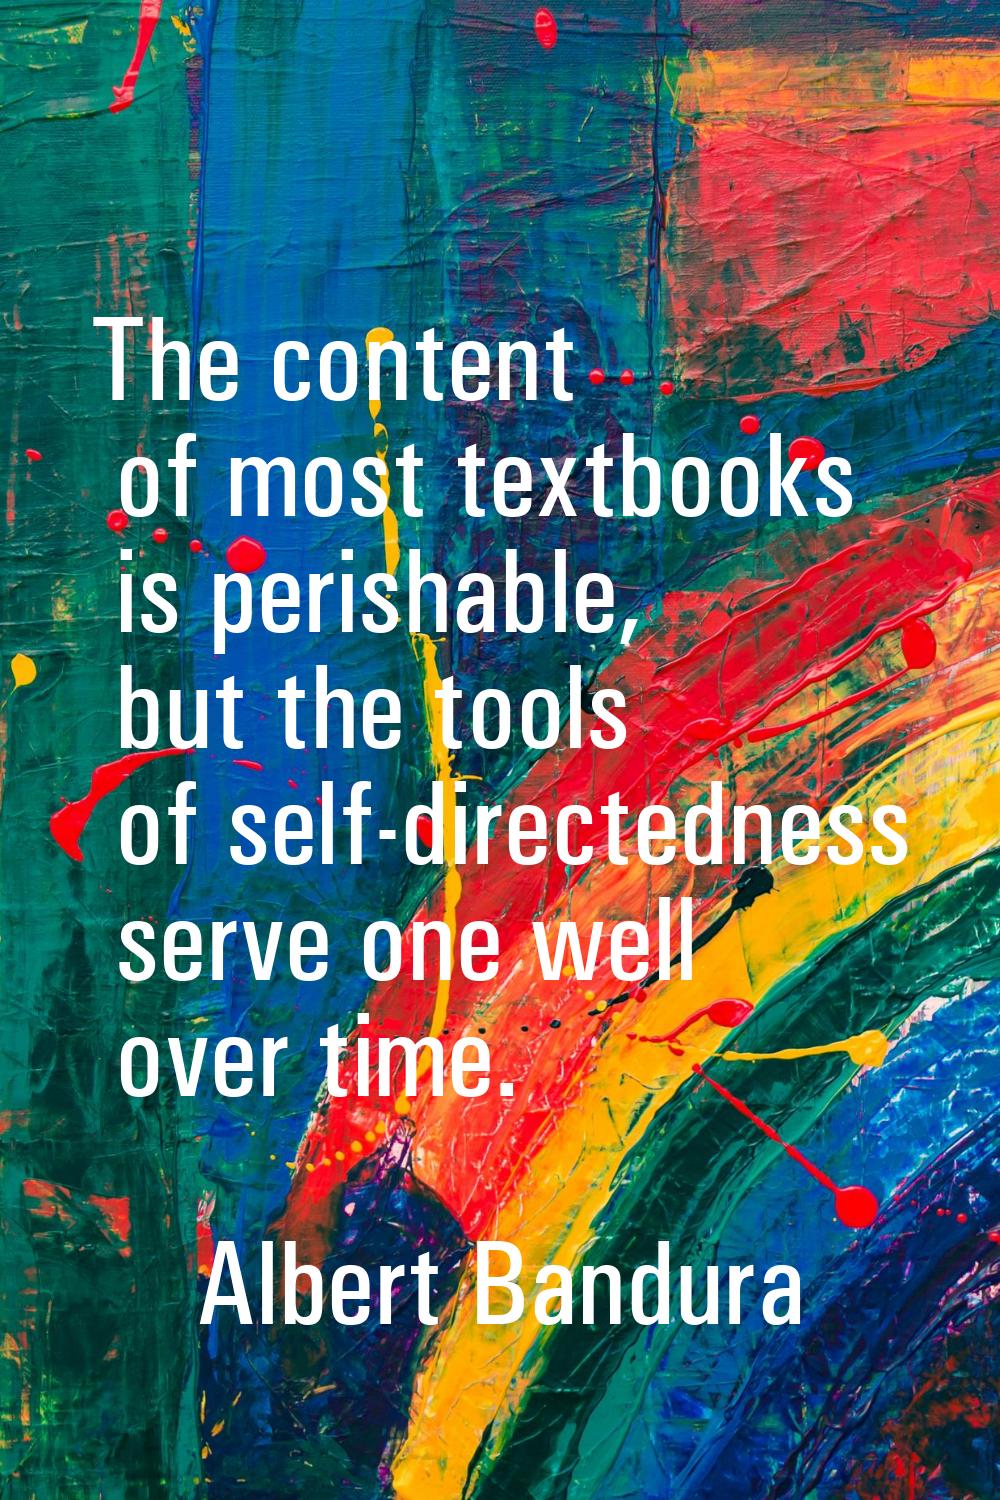 The content of most textbooks is perishable, but the tools of self-directedness serve one well over